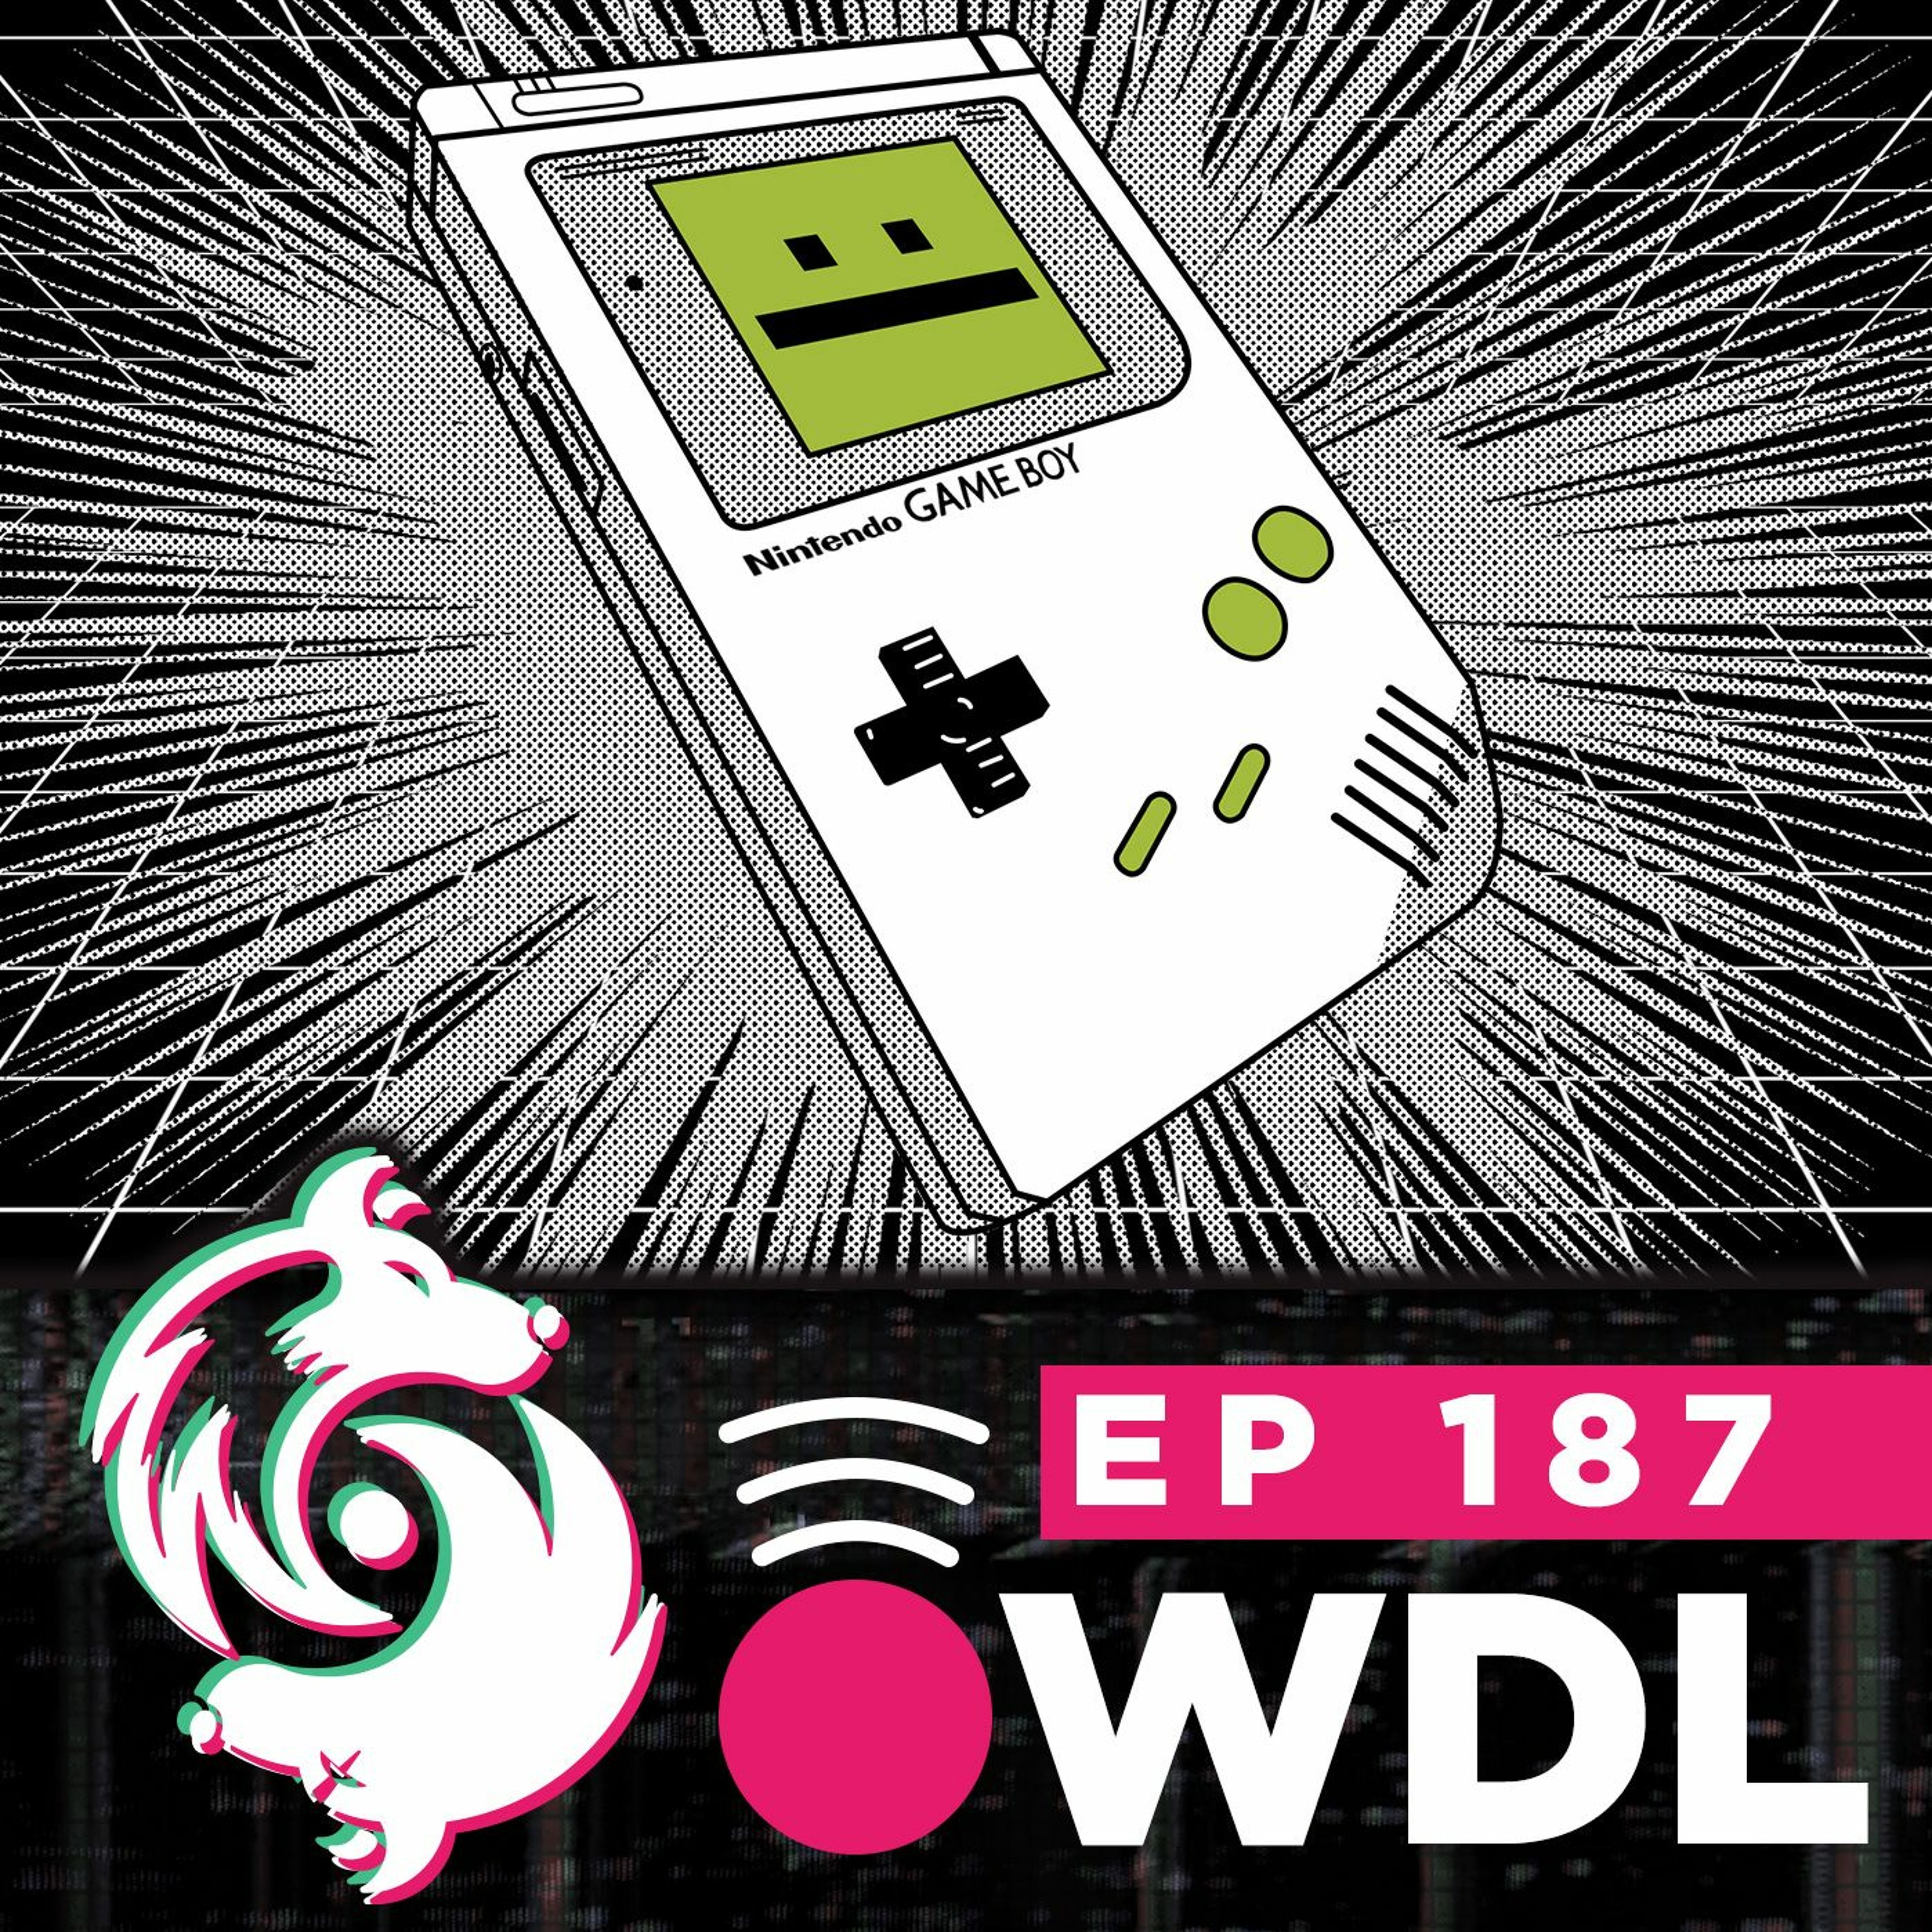 Nintendo’s Game Boy turns 30 (but sorry, no GB Classic) - WDL Ep 187